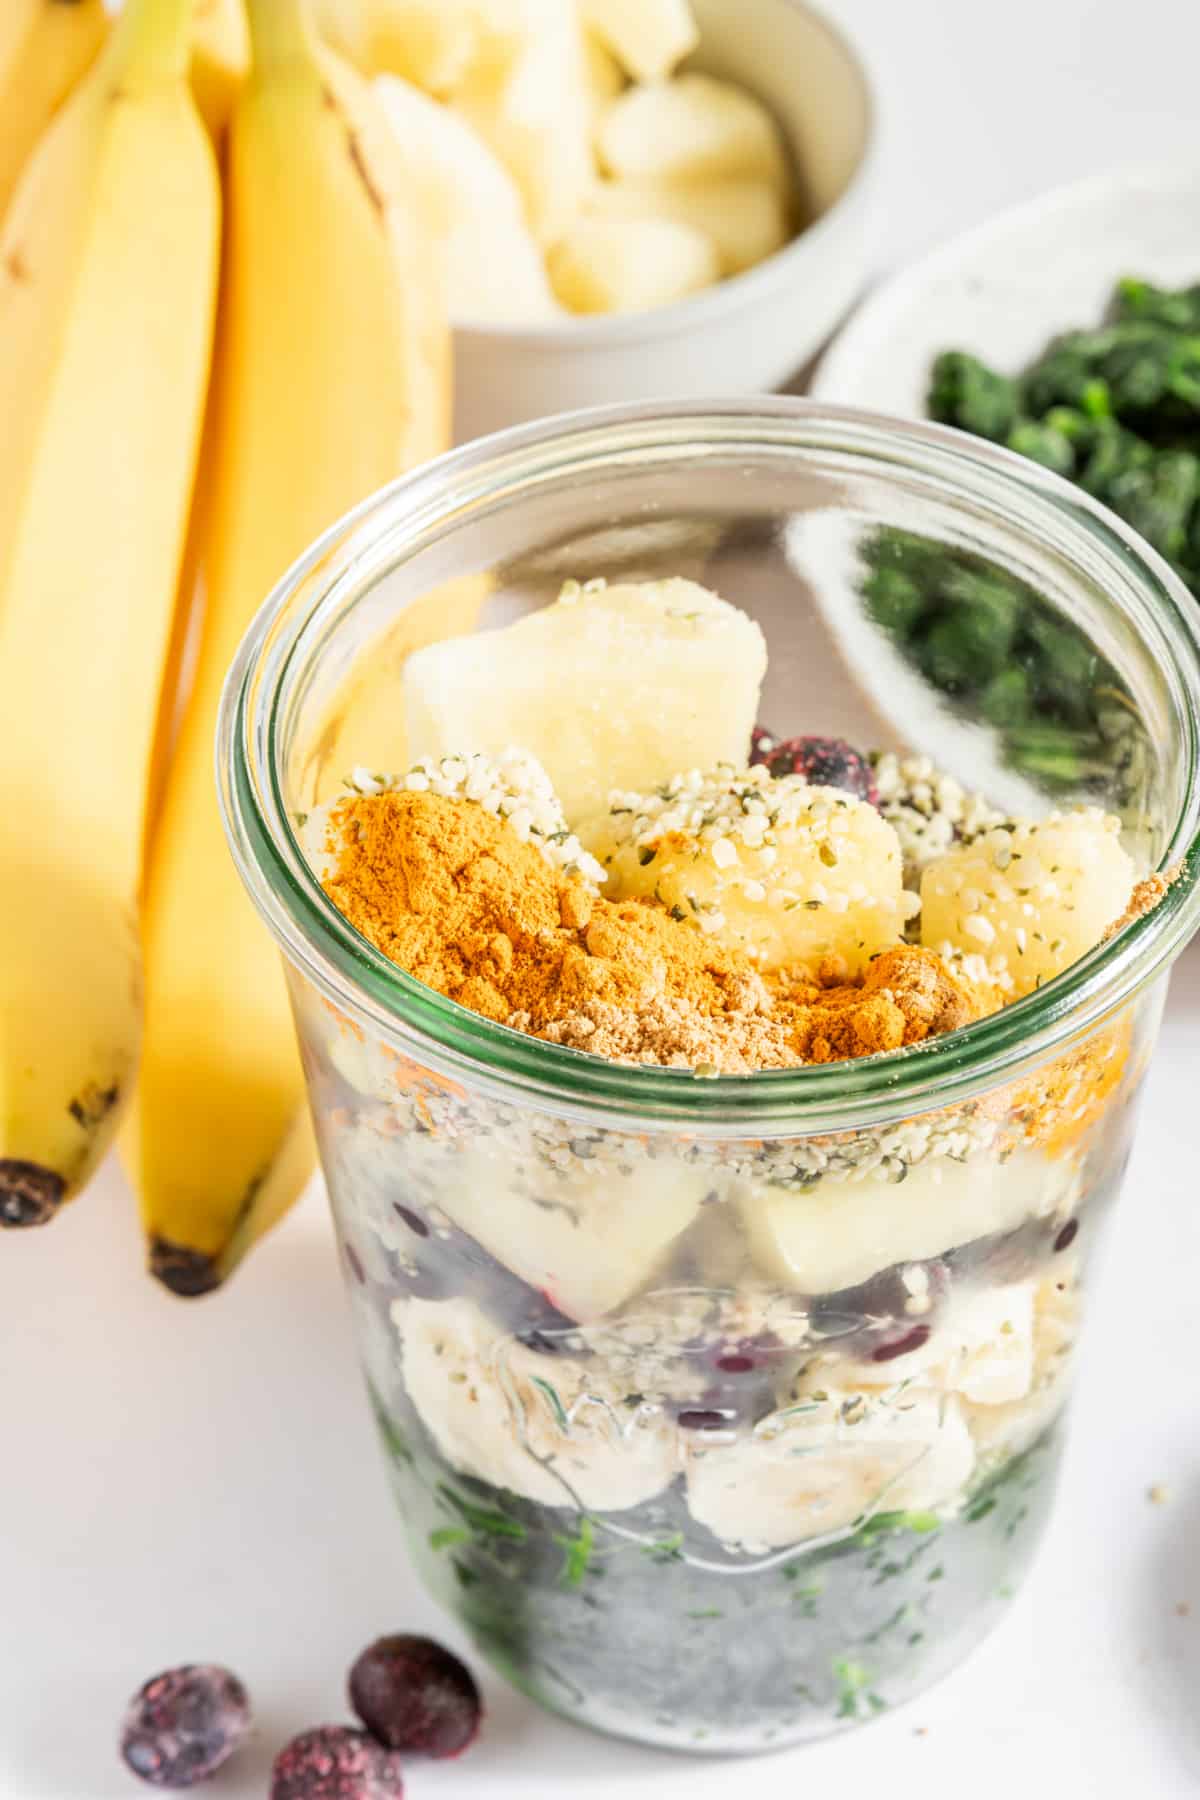 A large glass jar of smoothie ingredients for meal prepping: spinach, banana, pineapple, blueberries, hemp seeds, ground ginger, ground turmeric.